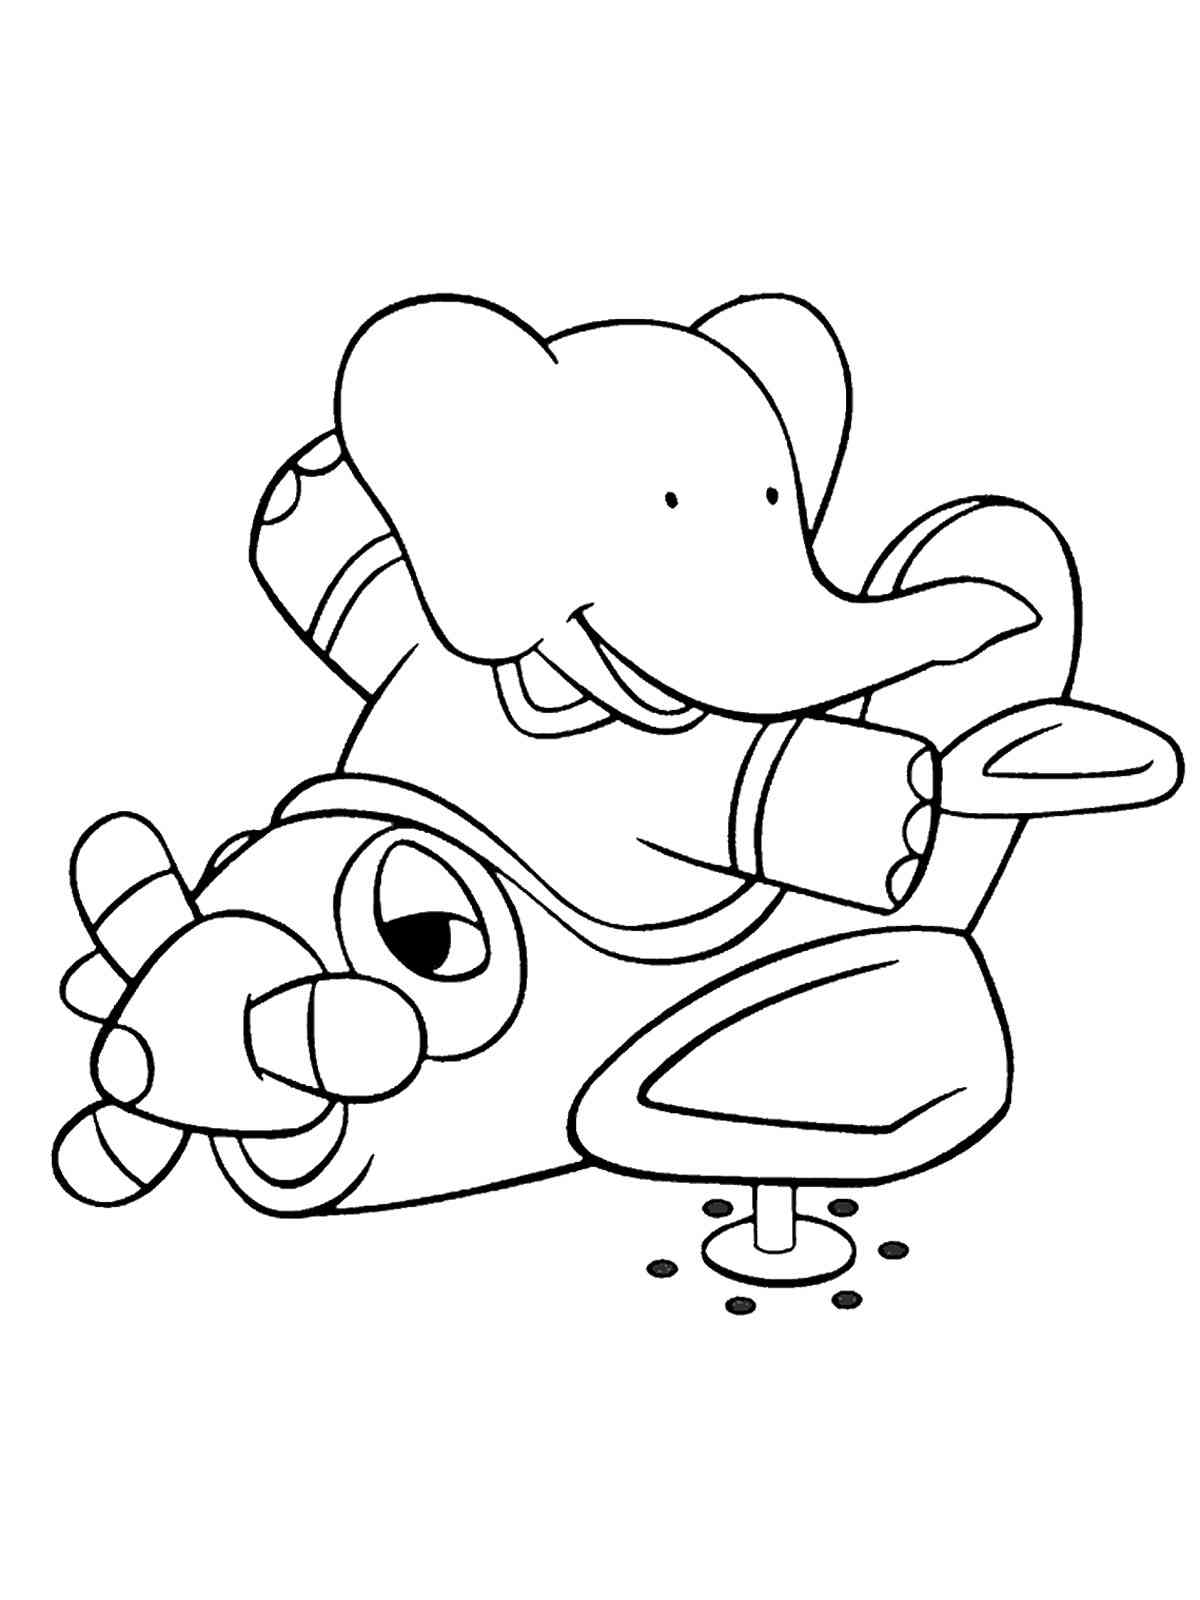 Arthur on a plane coloring page